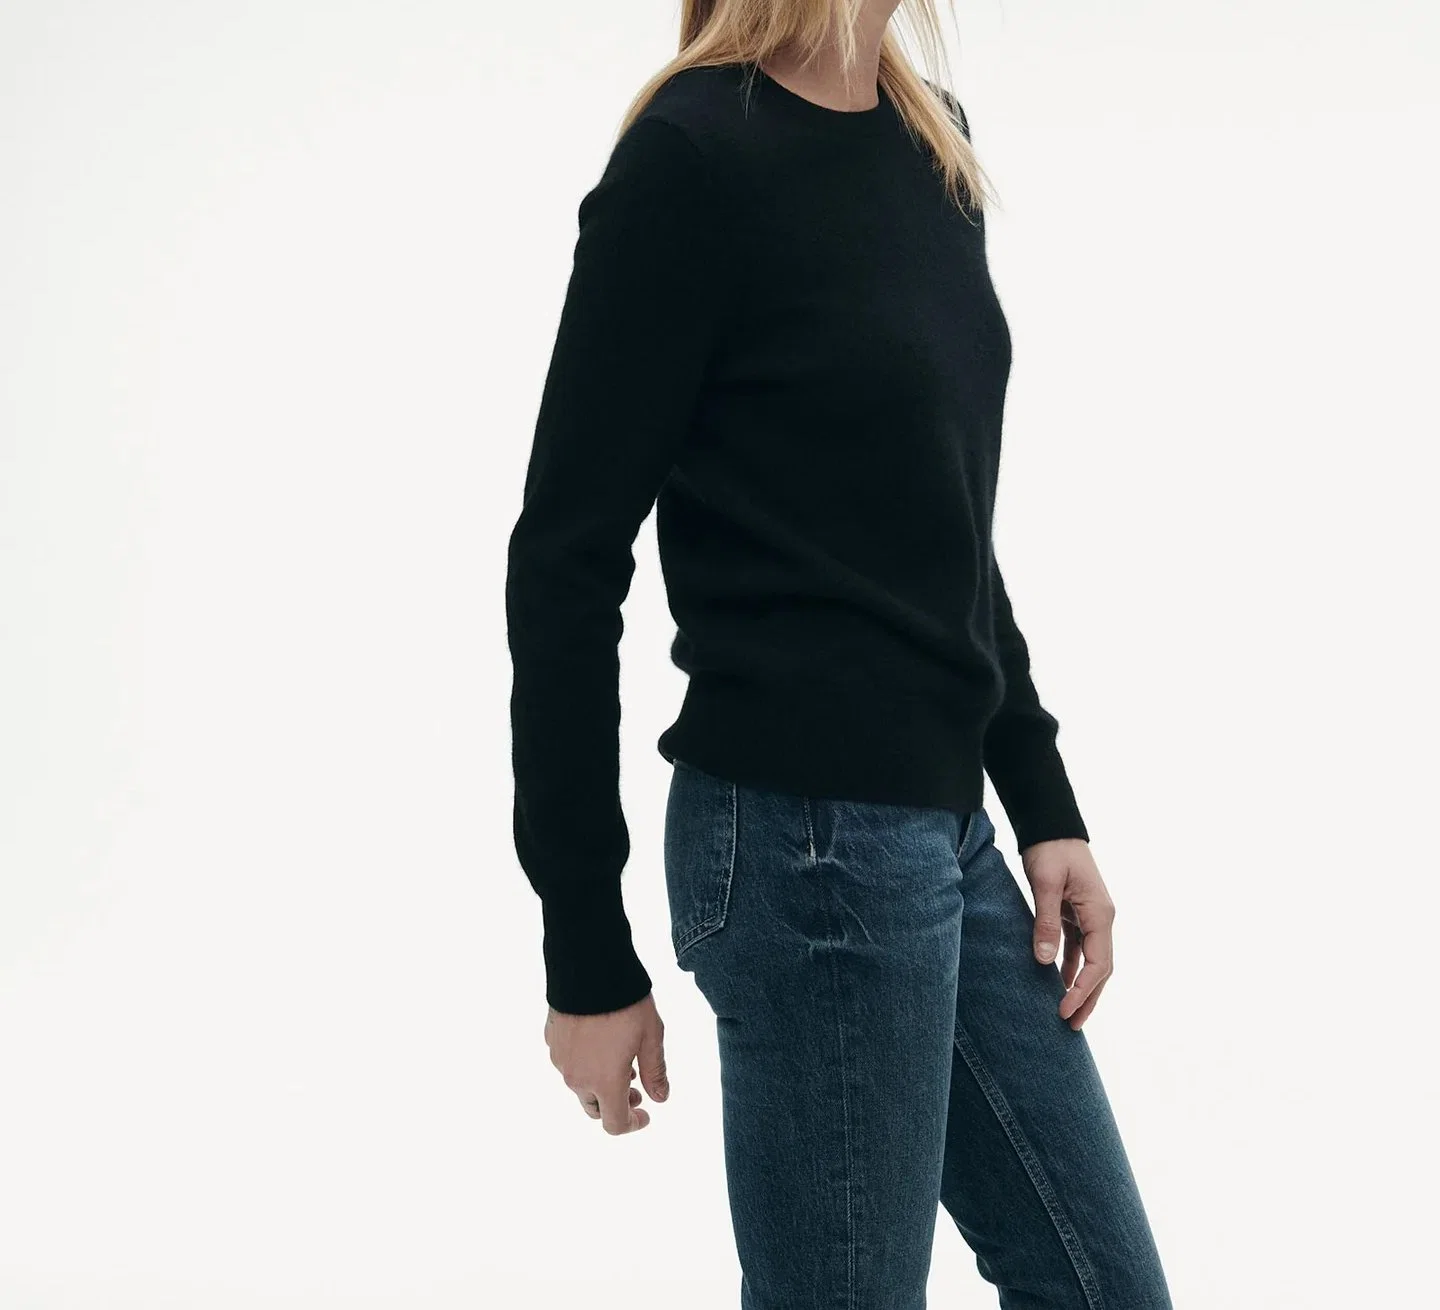 100% Cashmere Basic Style Pullover Sweater Apparel